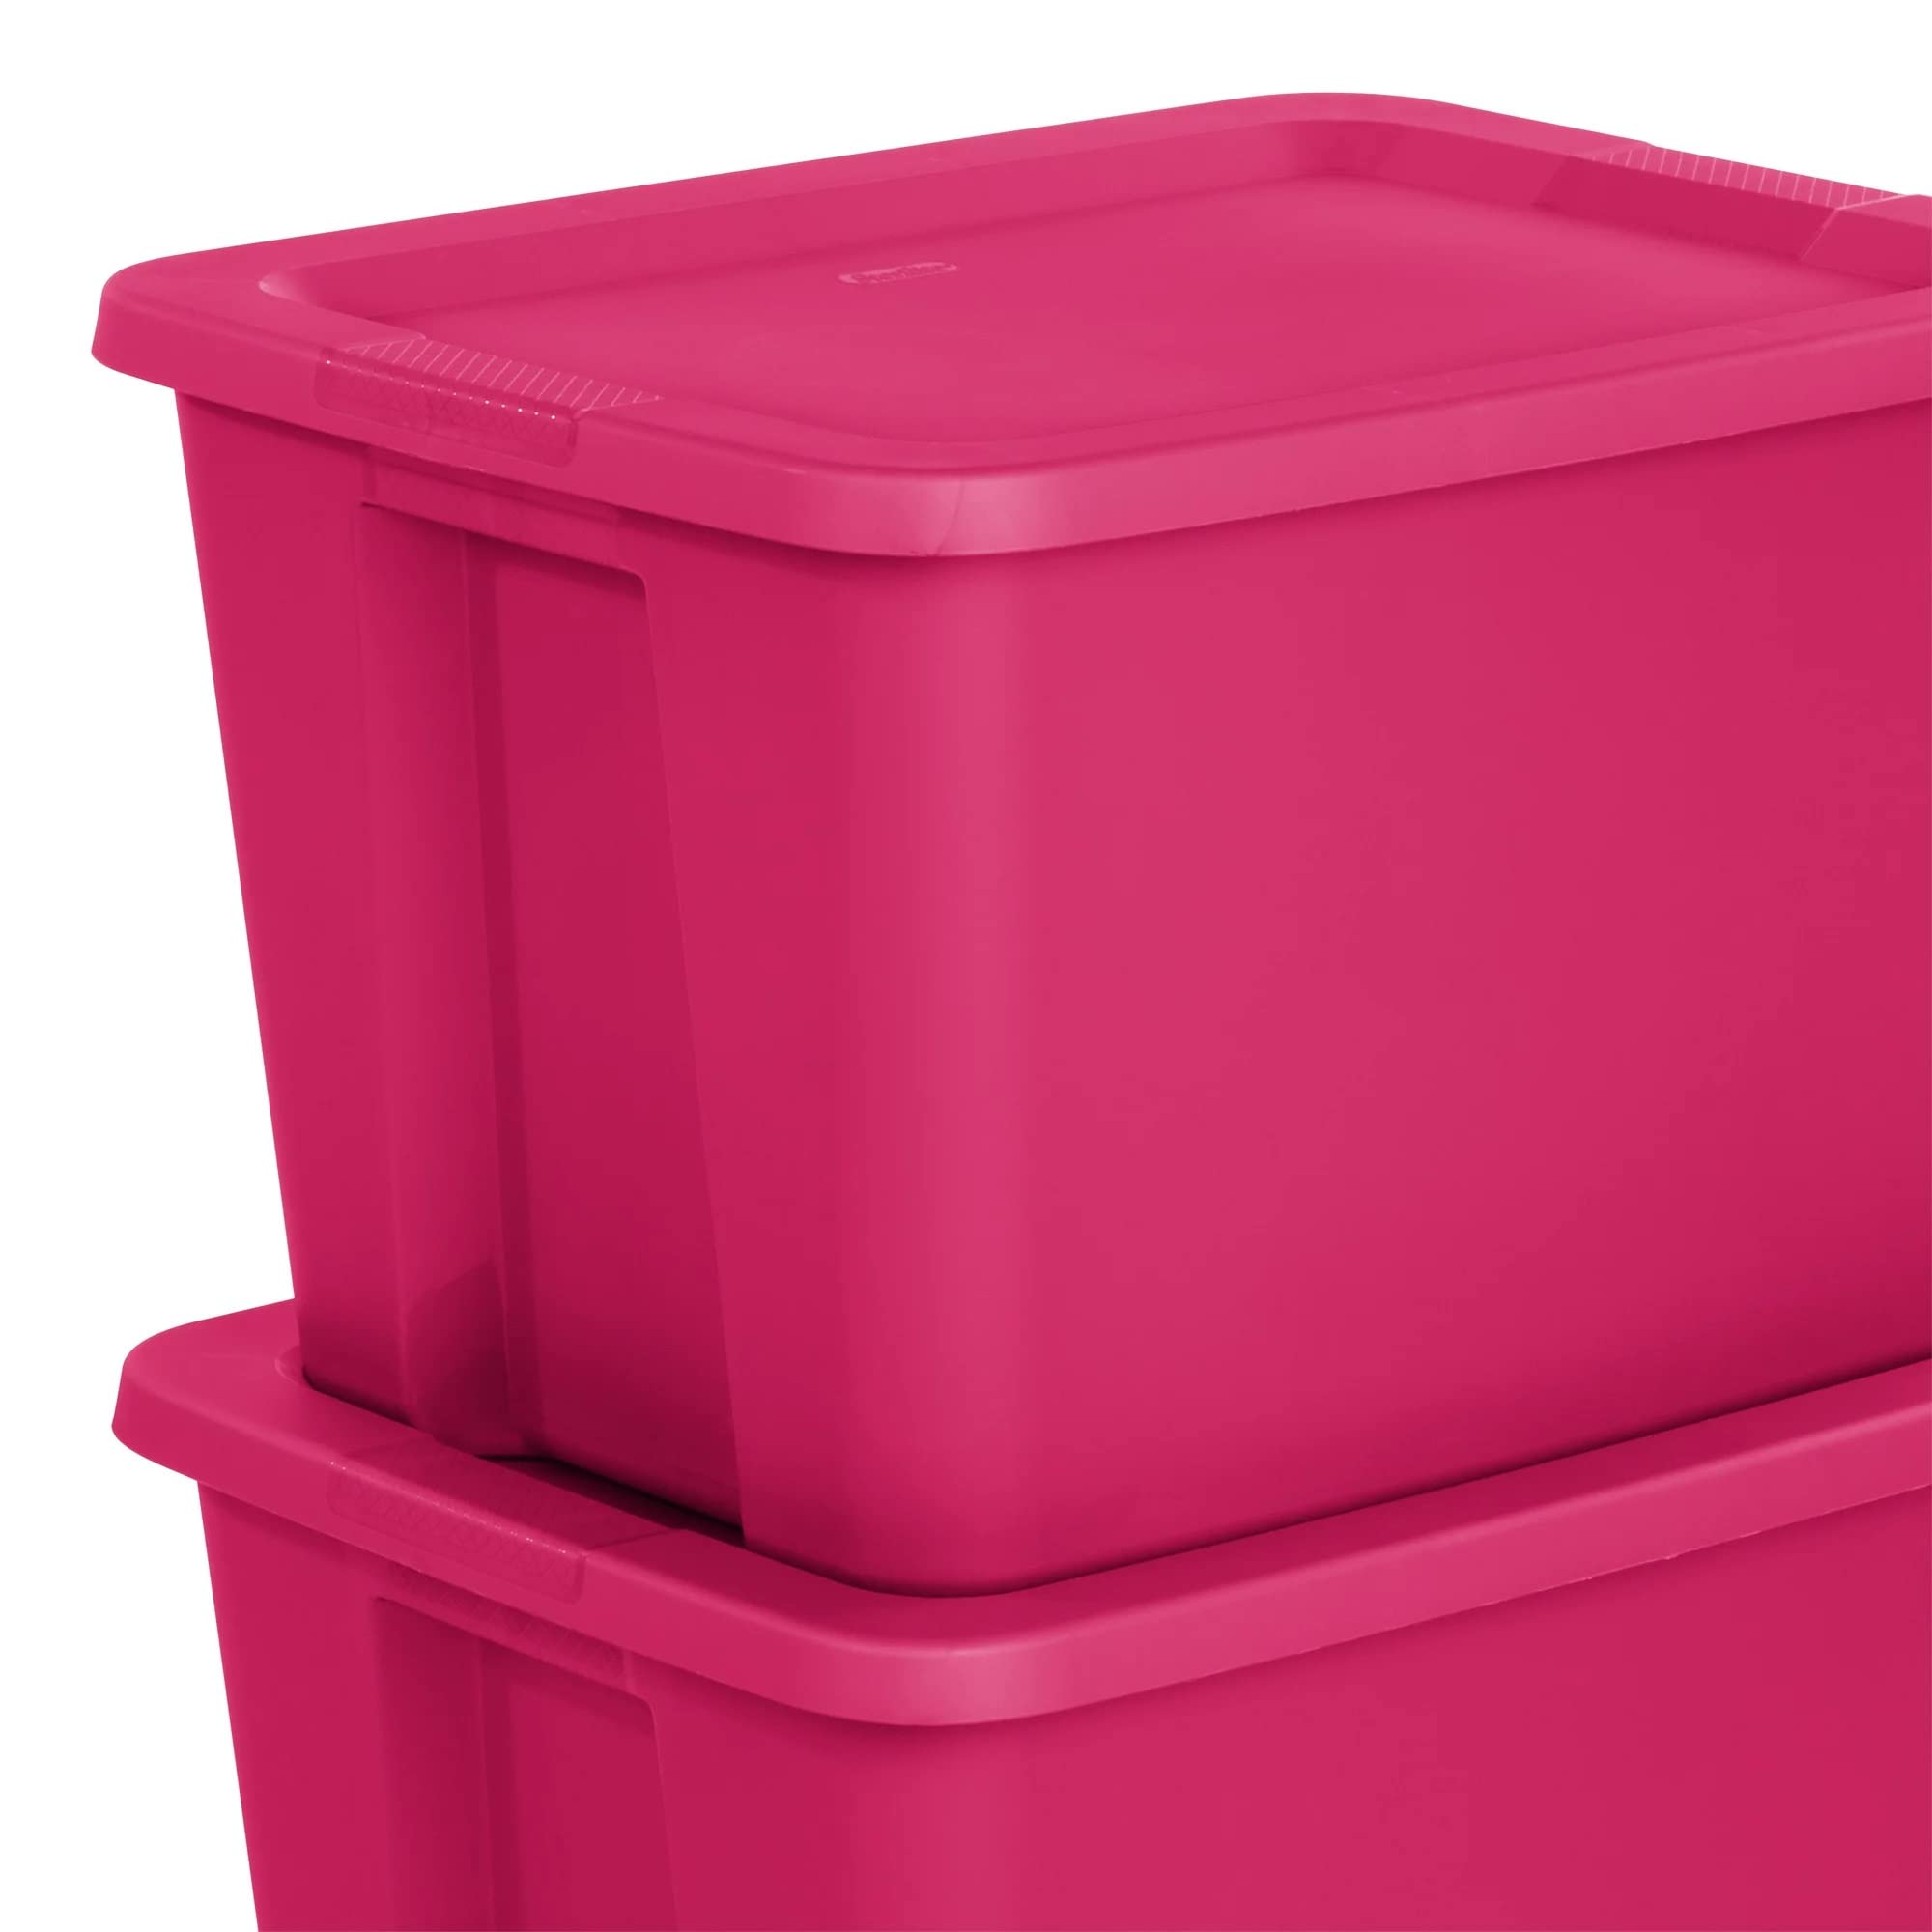 18 Gallon Plastic Storage Tote Box,Storage Bin Tote Organizing Container With Durable Lid, Stackable and Nestable Snap Lid Plastic Storage Bin,Fuchsia Burst,Set of 8